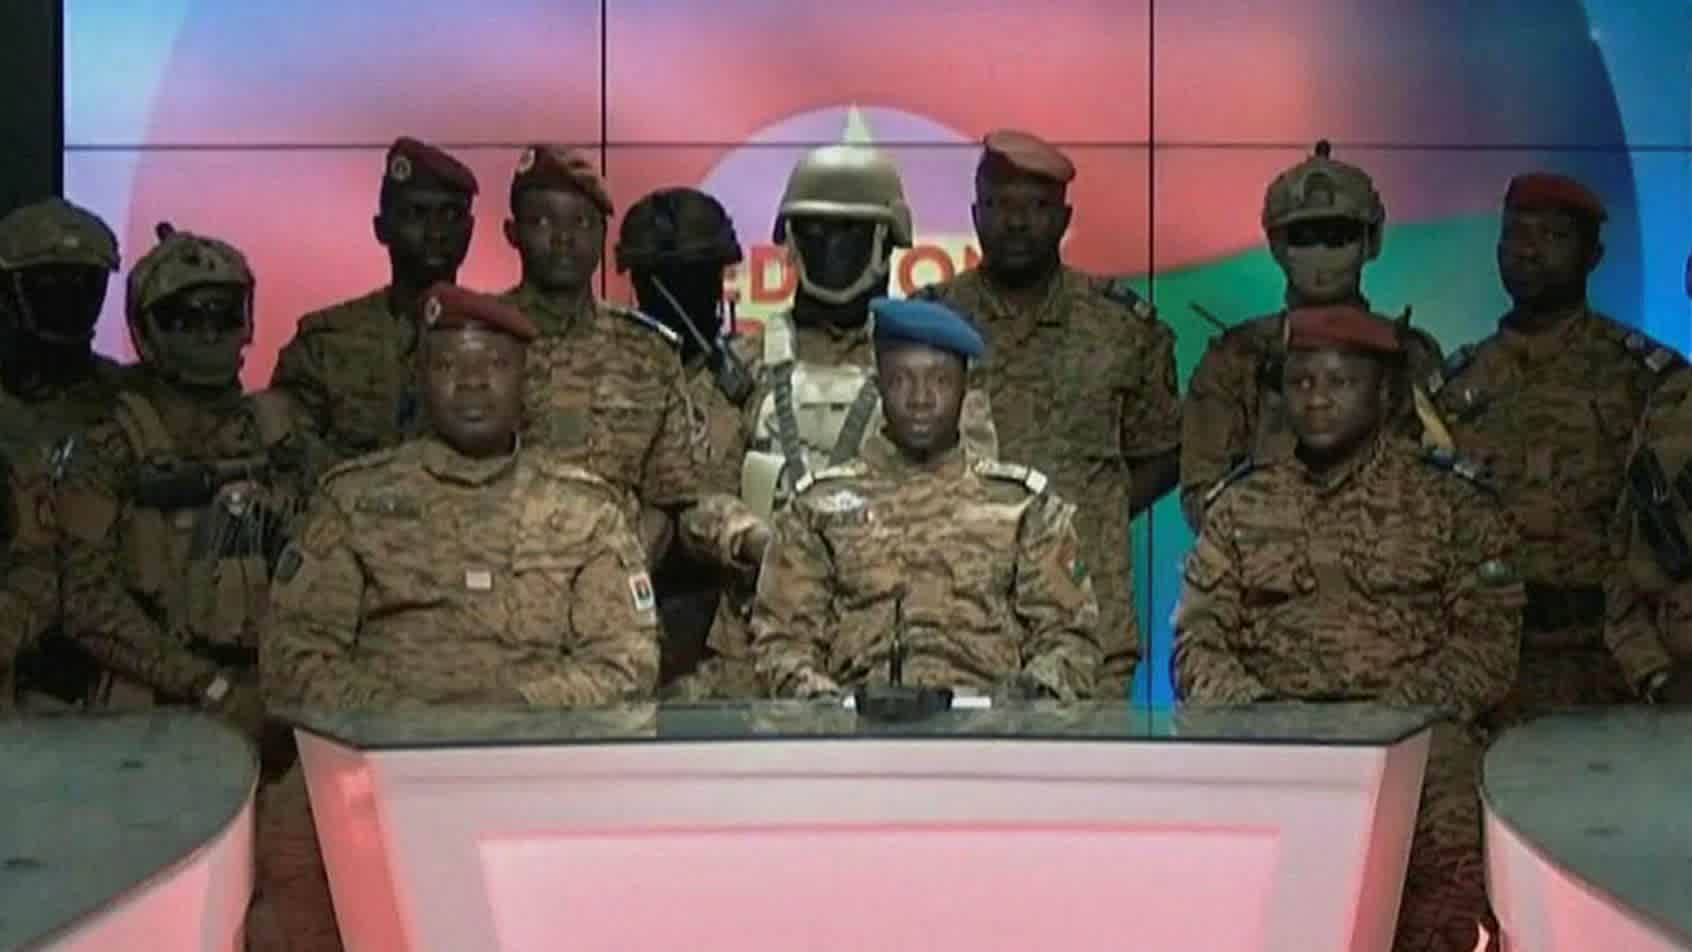 Burkina Faso’s president overthrown in military coup